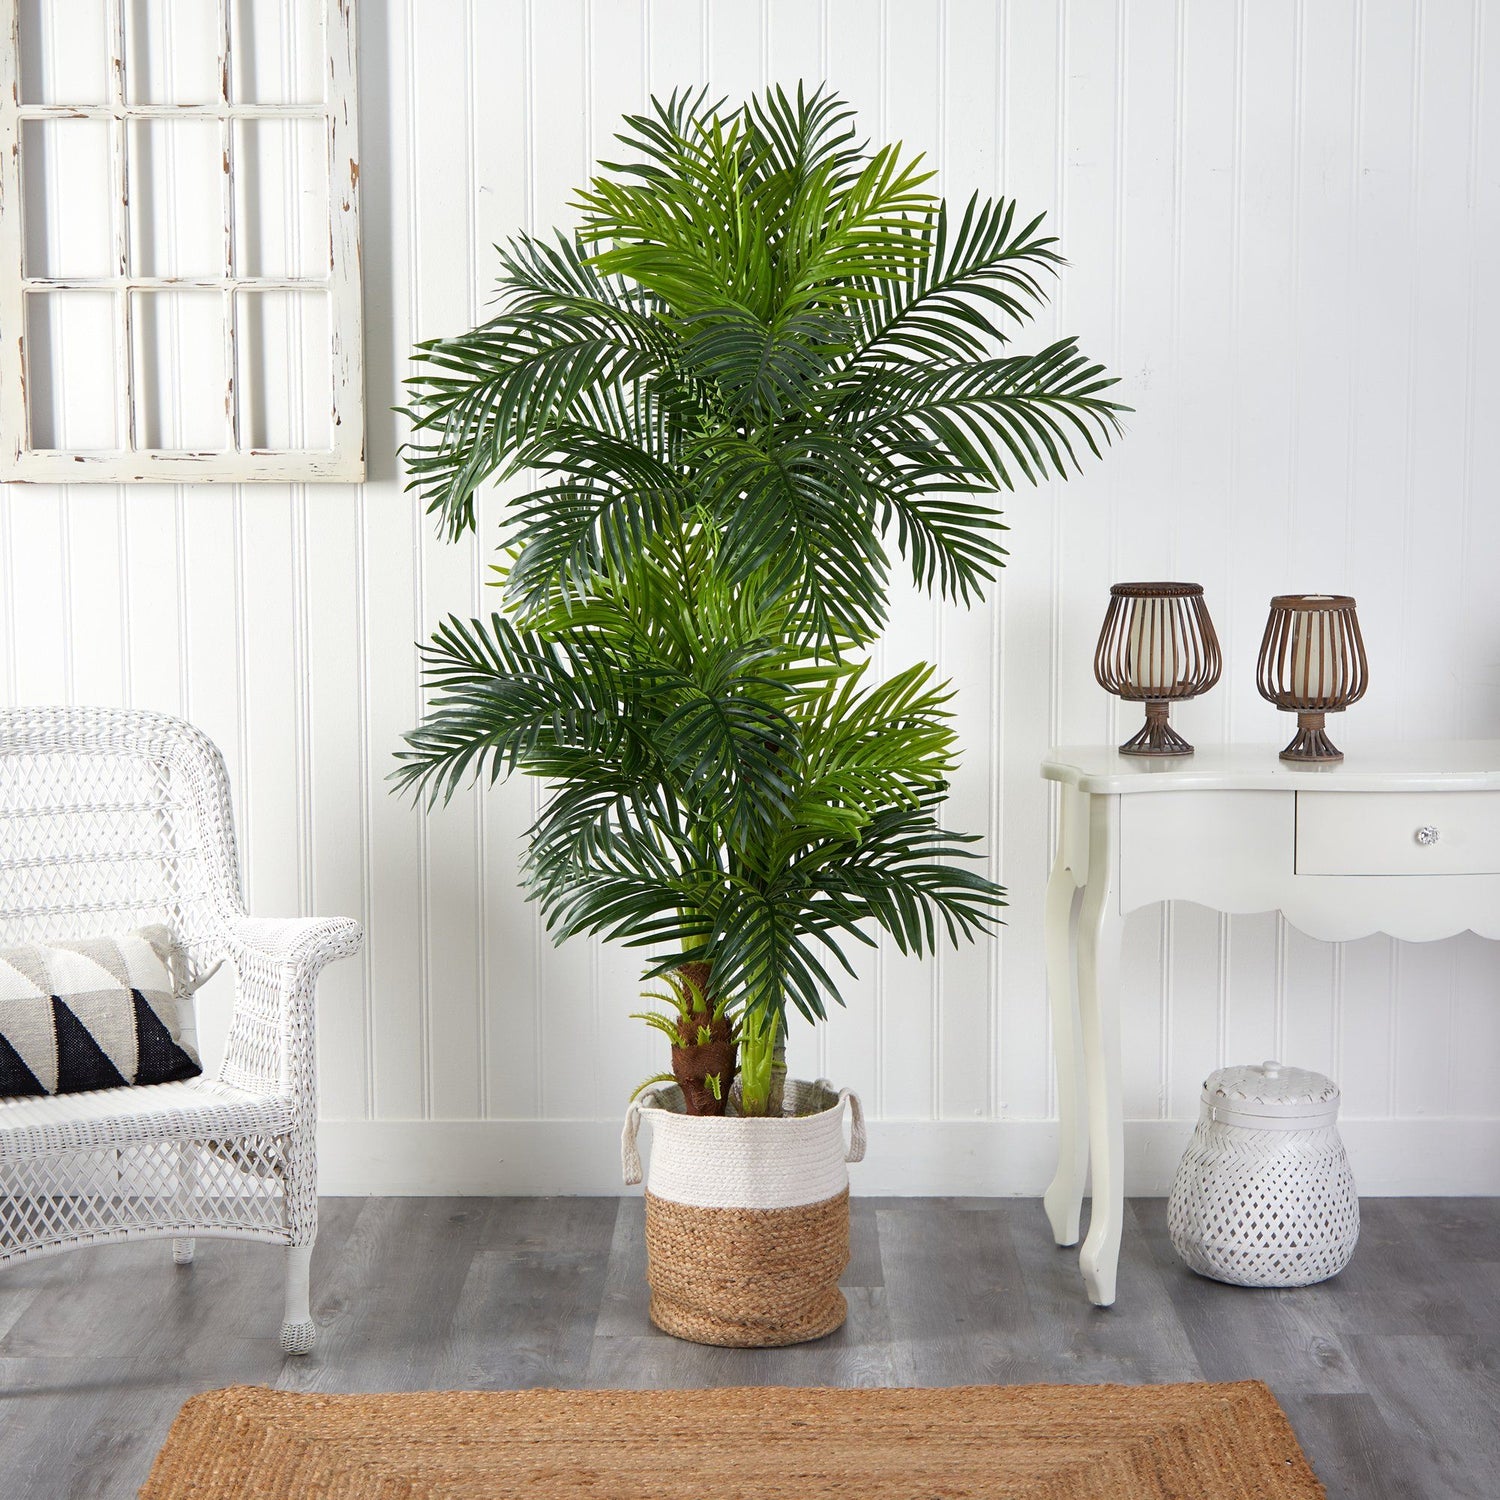 6’ Hawaii Artificial Palm Tree in Handmade Natural Jute and Cotton Planter